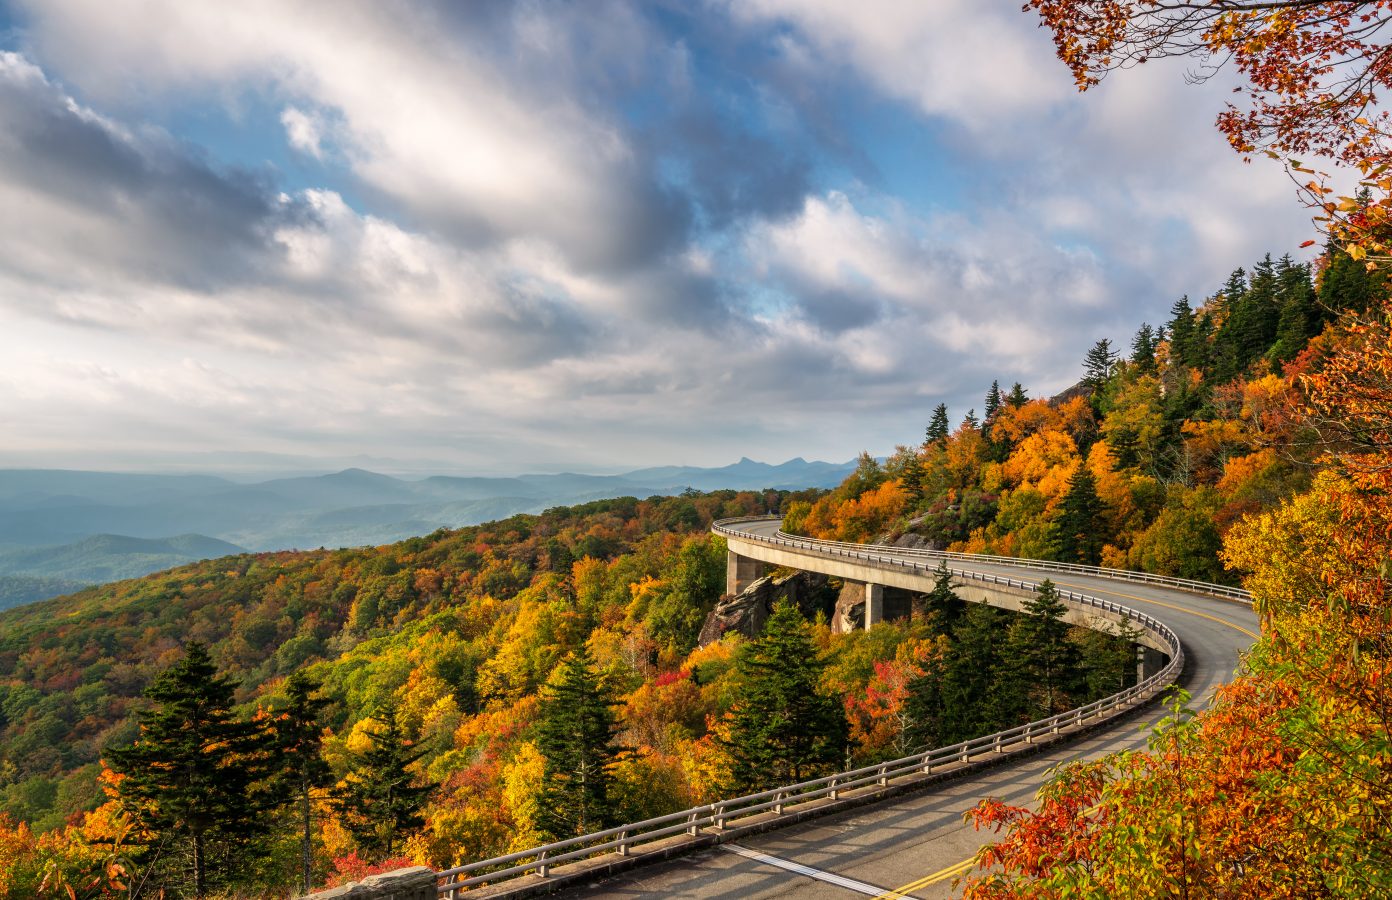 Blue Ridge Parkway in Great Smoky Mountains National Park